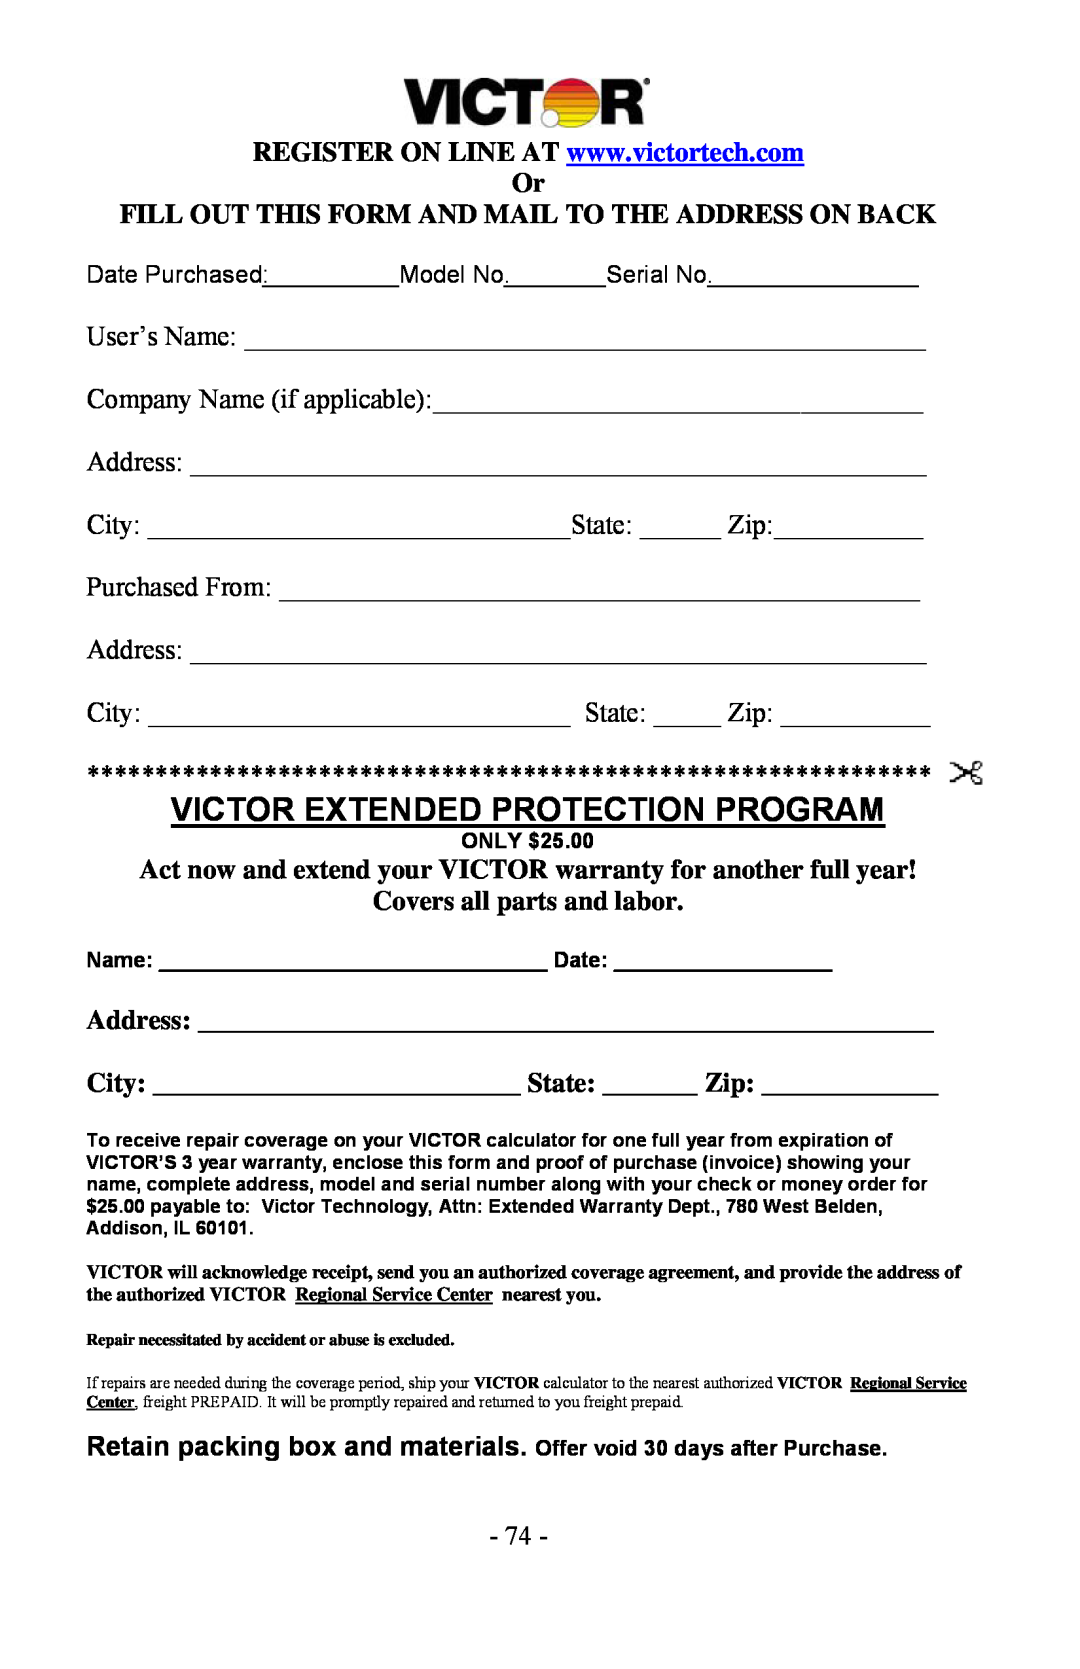 Victor 1560-6, 1530-6, 1570-6 manual Victor Extended Protection Program, Covers all parts and labor 